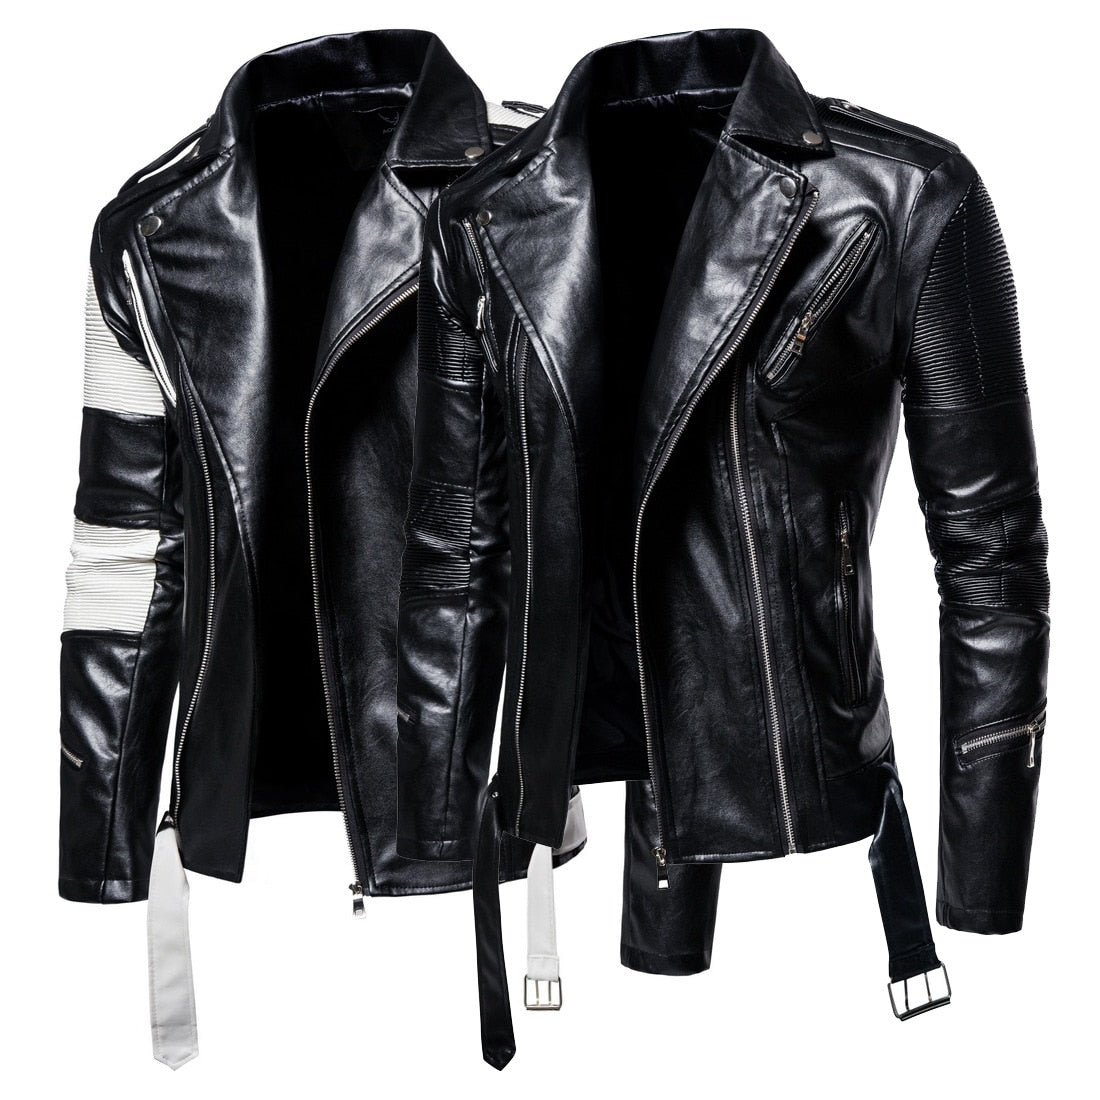 High-Quality Men's Black Leather Jackets New Slim Fit PU Leather Coats - Acapparelstore